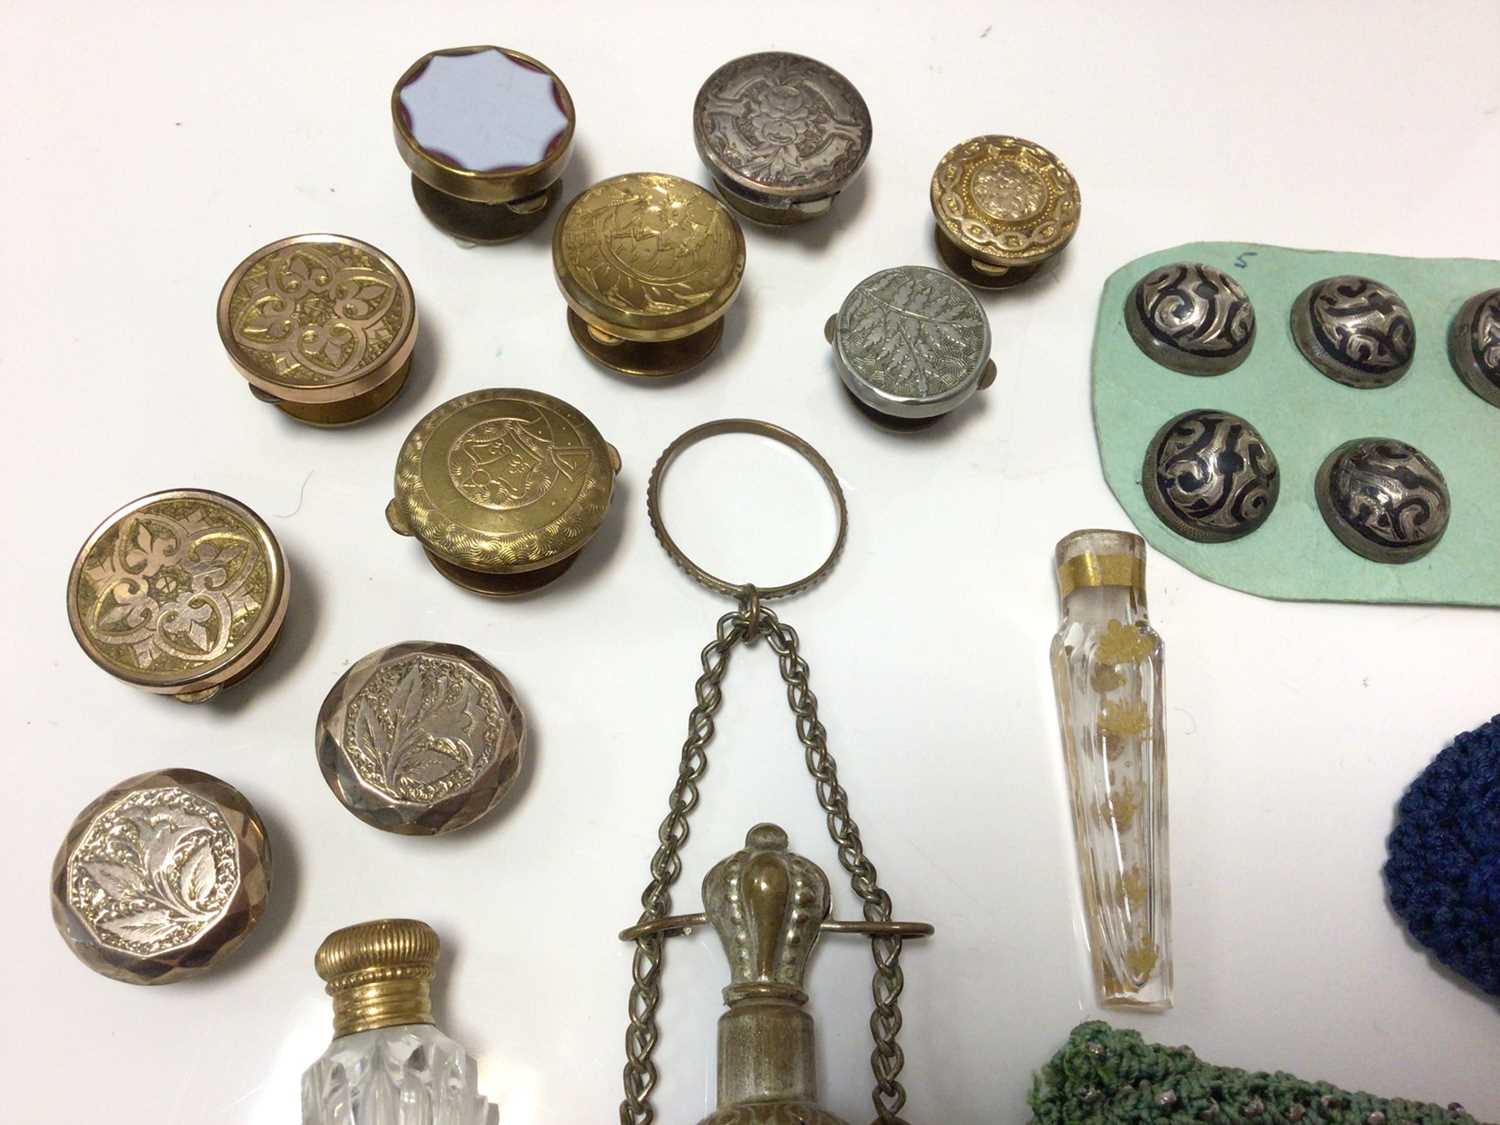 Vertical items and bijouterie including scent bottles, pen knives, buttons and miser's purses - Image 7 of 7